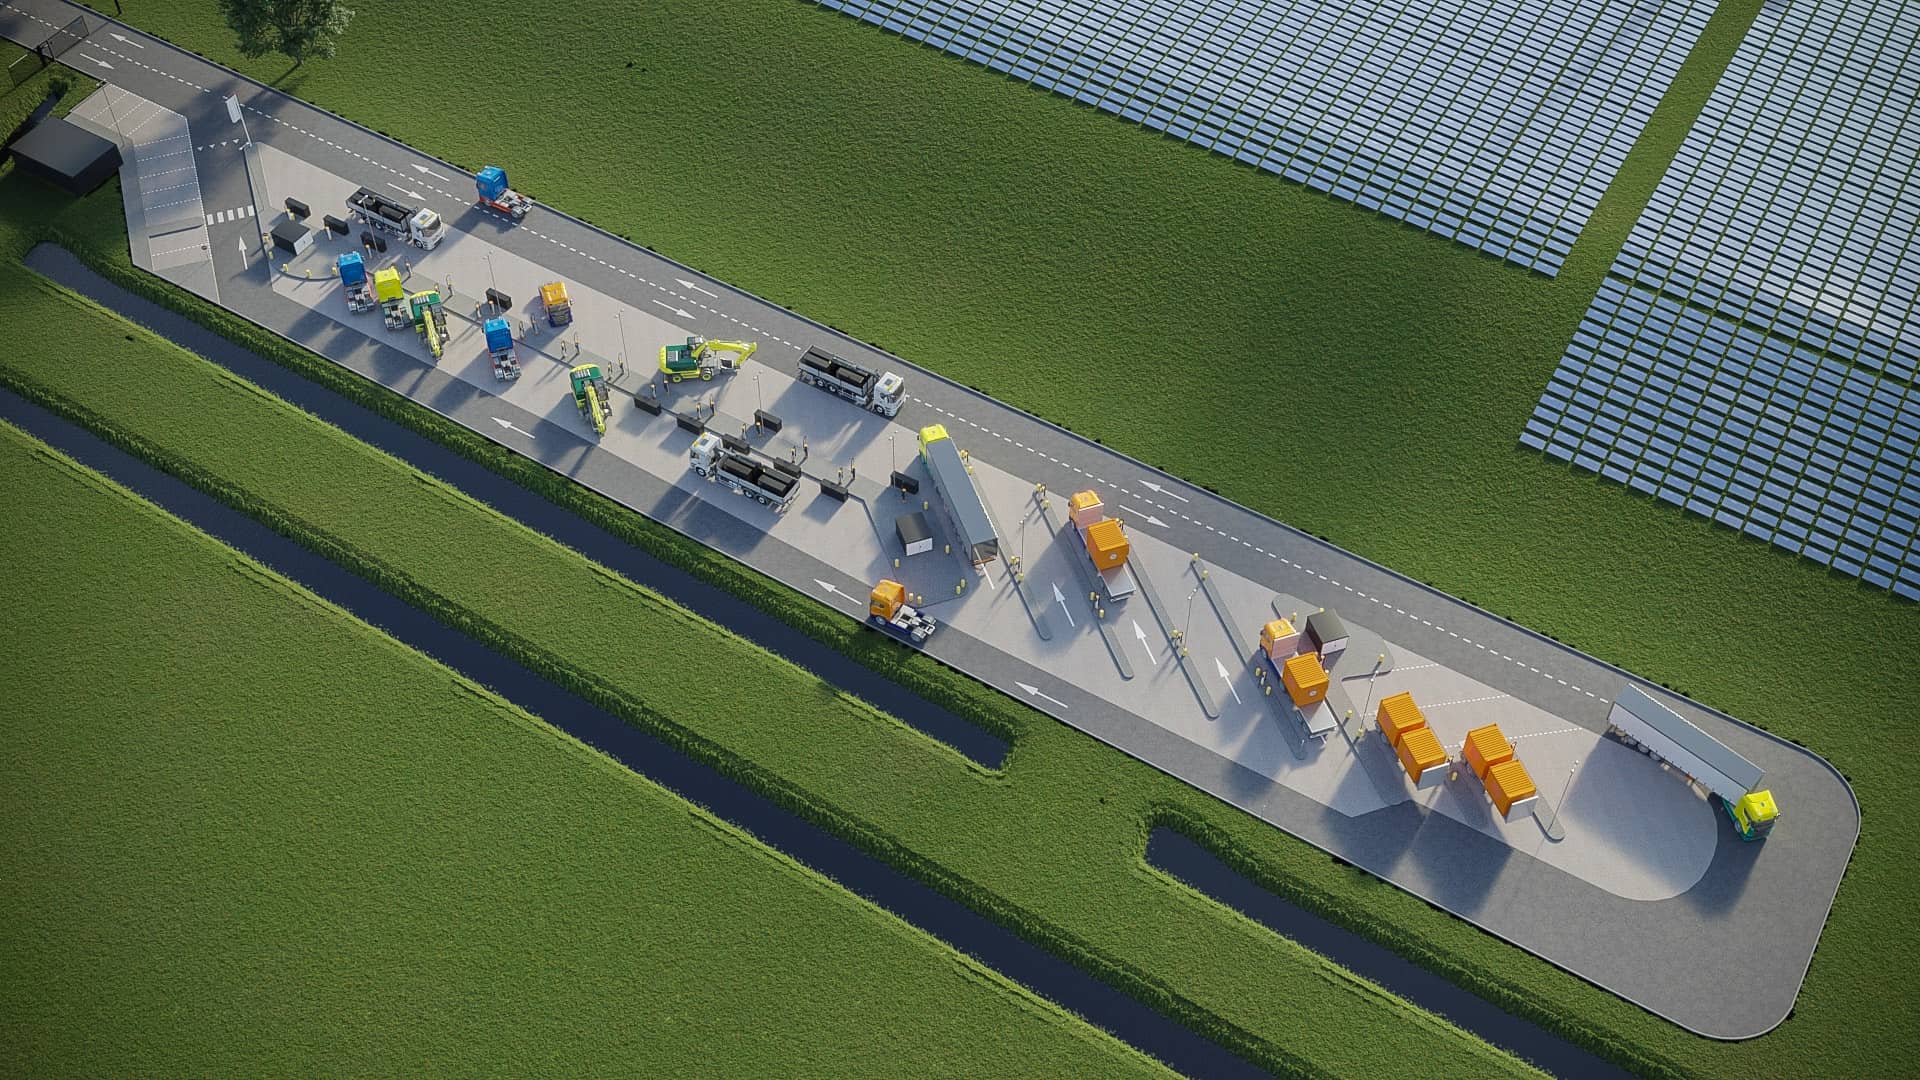 A render of the WattHub charging station